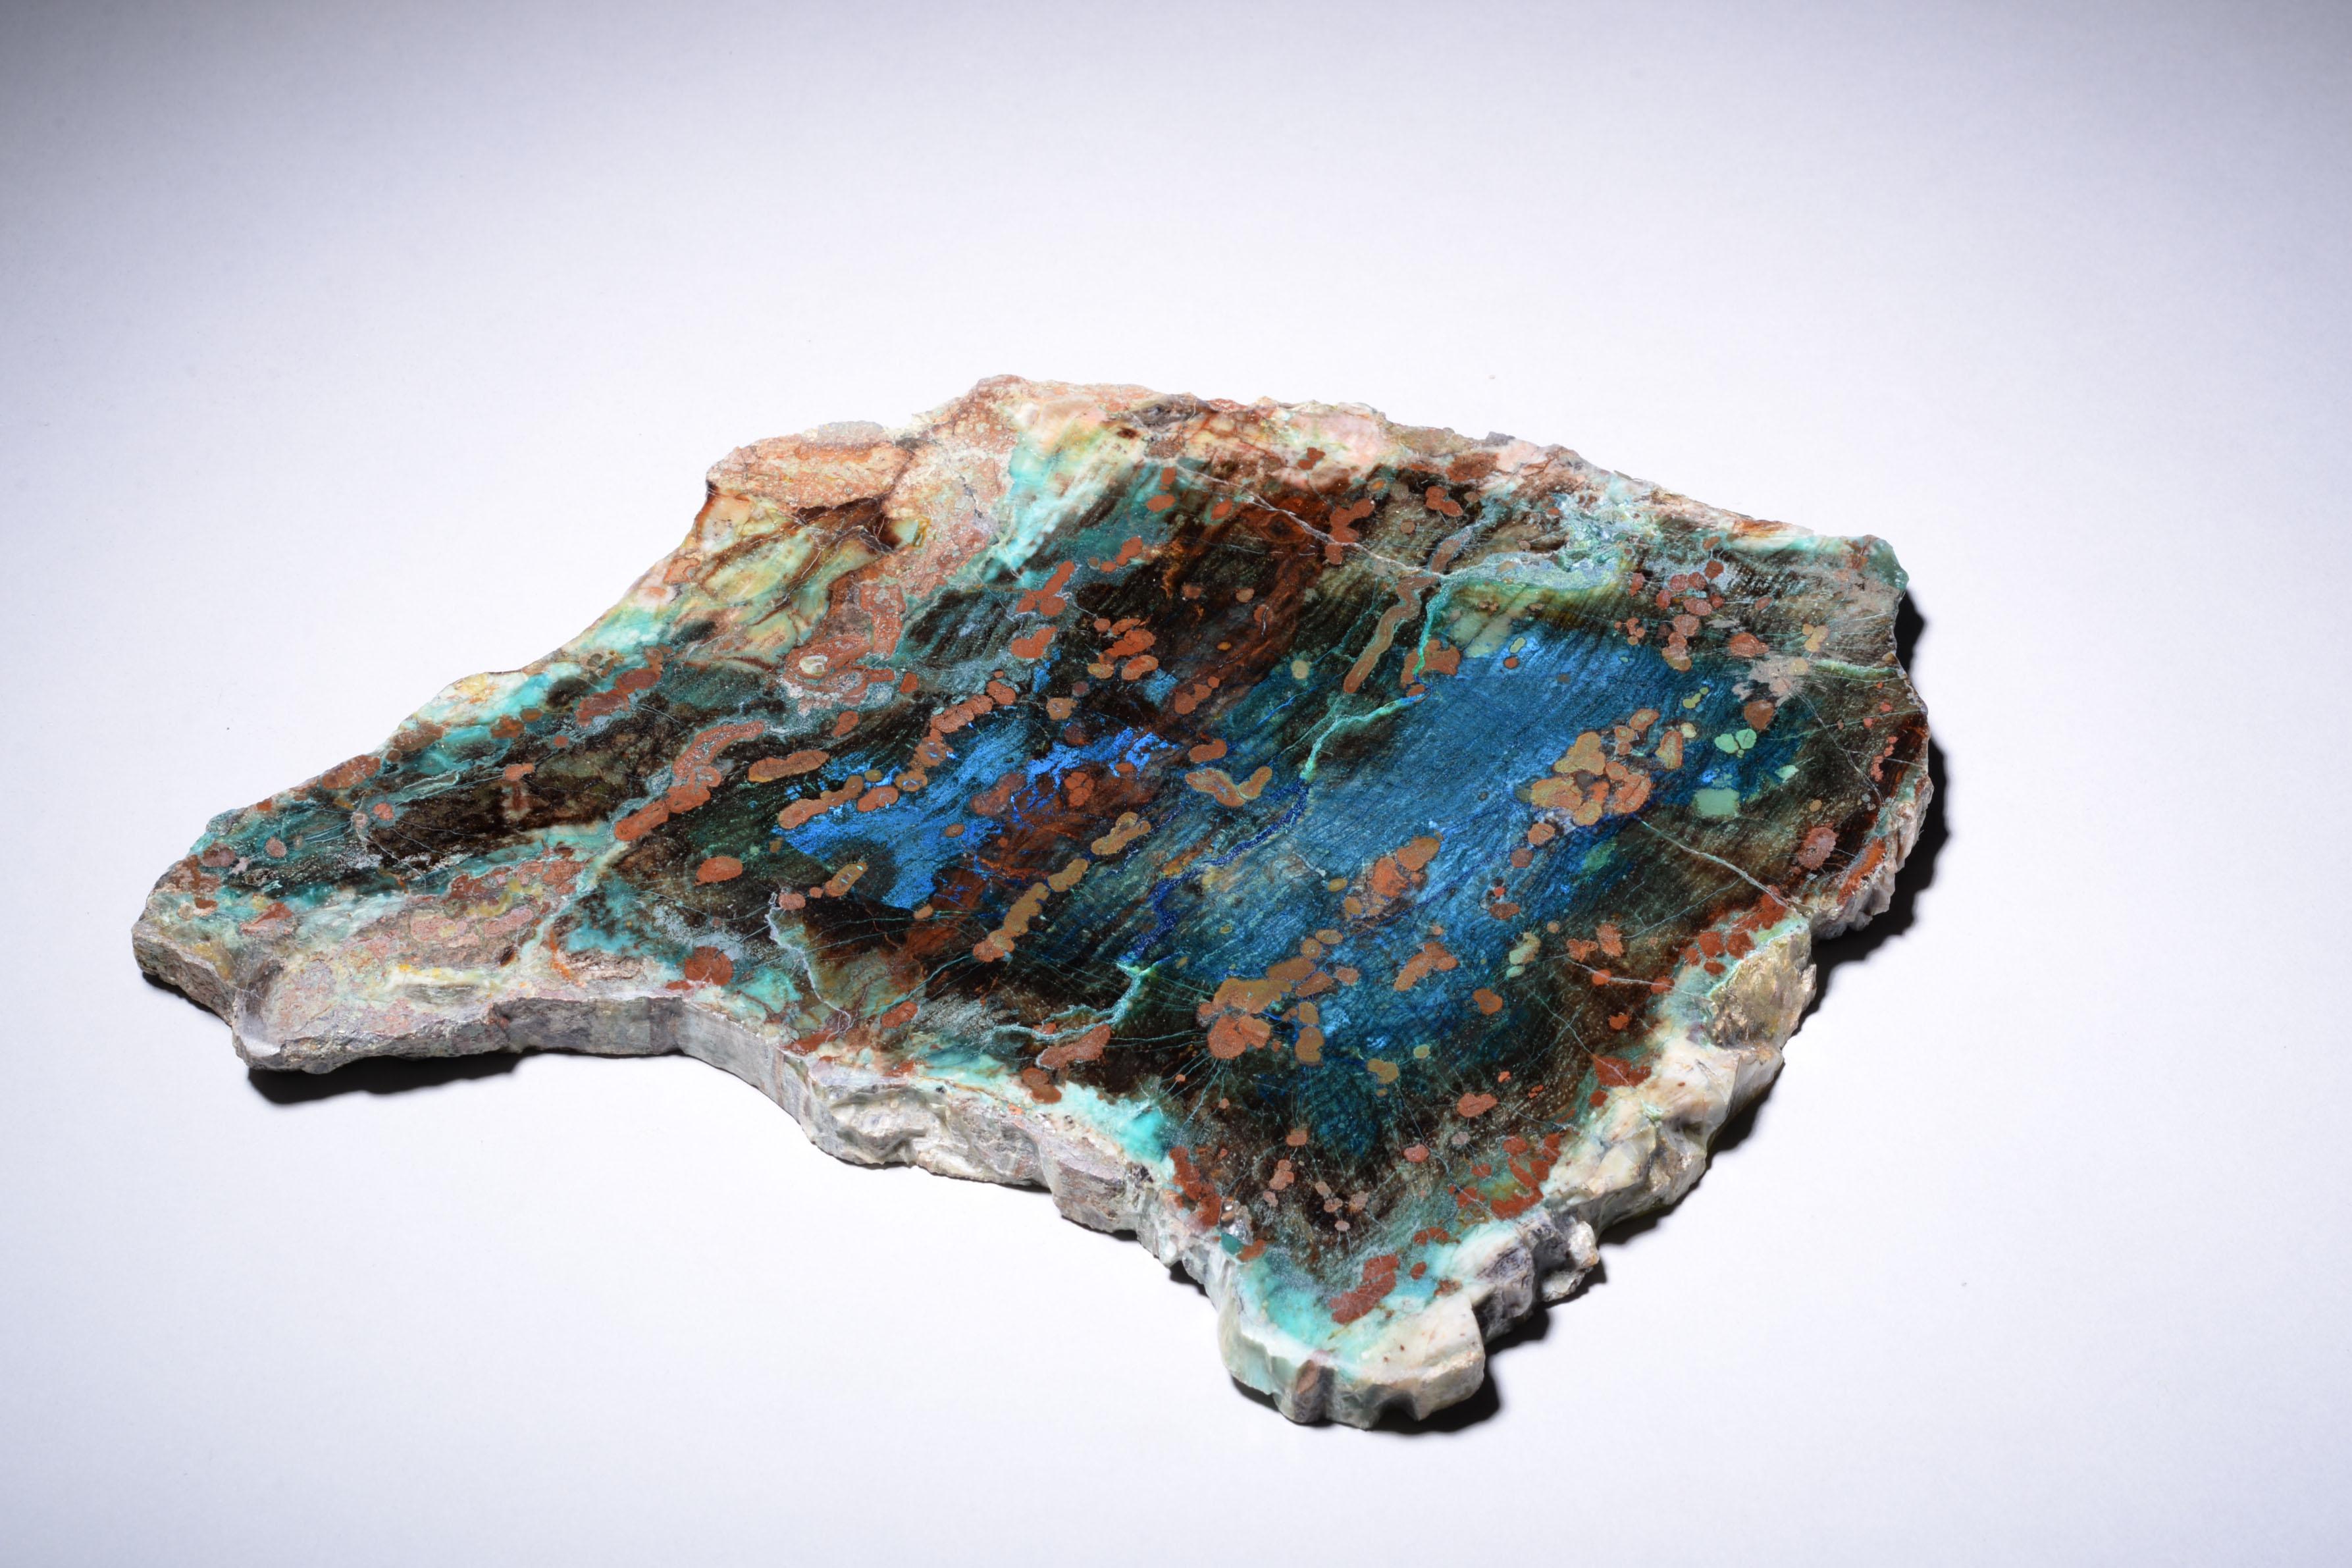 This beautiful, vibrant cross section of petrified wood originates from Turkey. Its magnificent colours were created by waters rich in blue azurite, turquoise-green malachite and copper-red cuprite, which filtered into the wood as it fossilised.